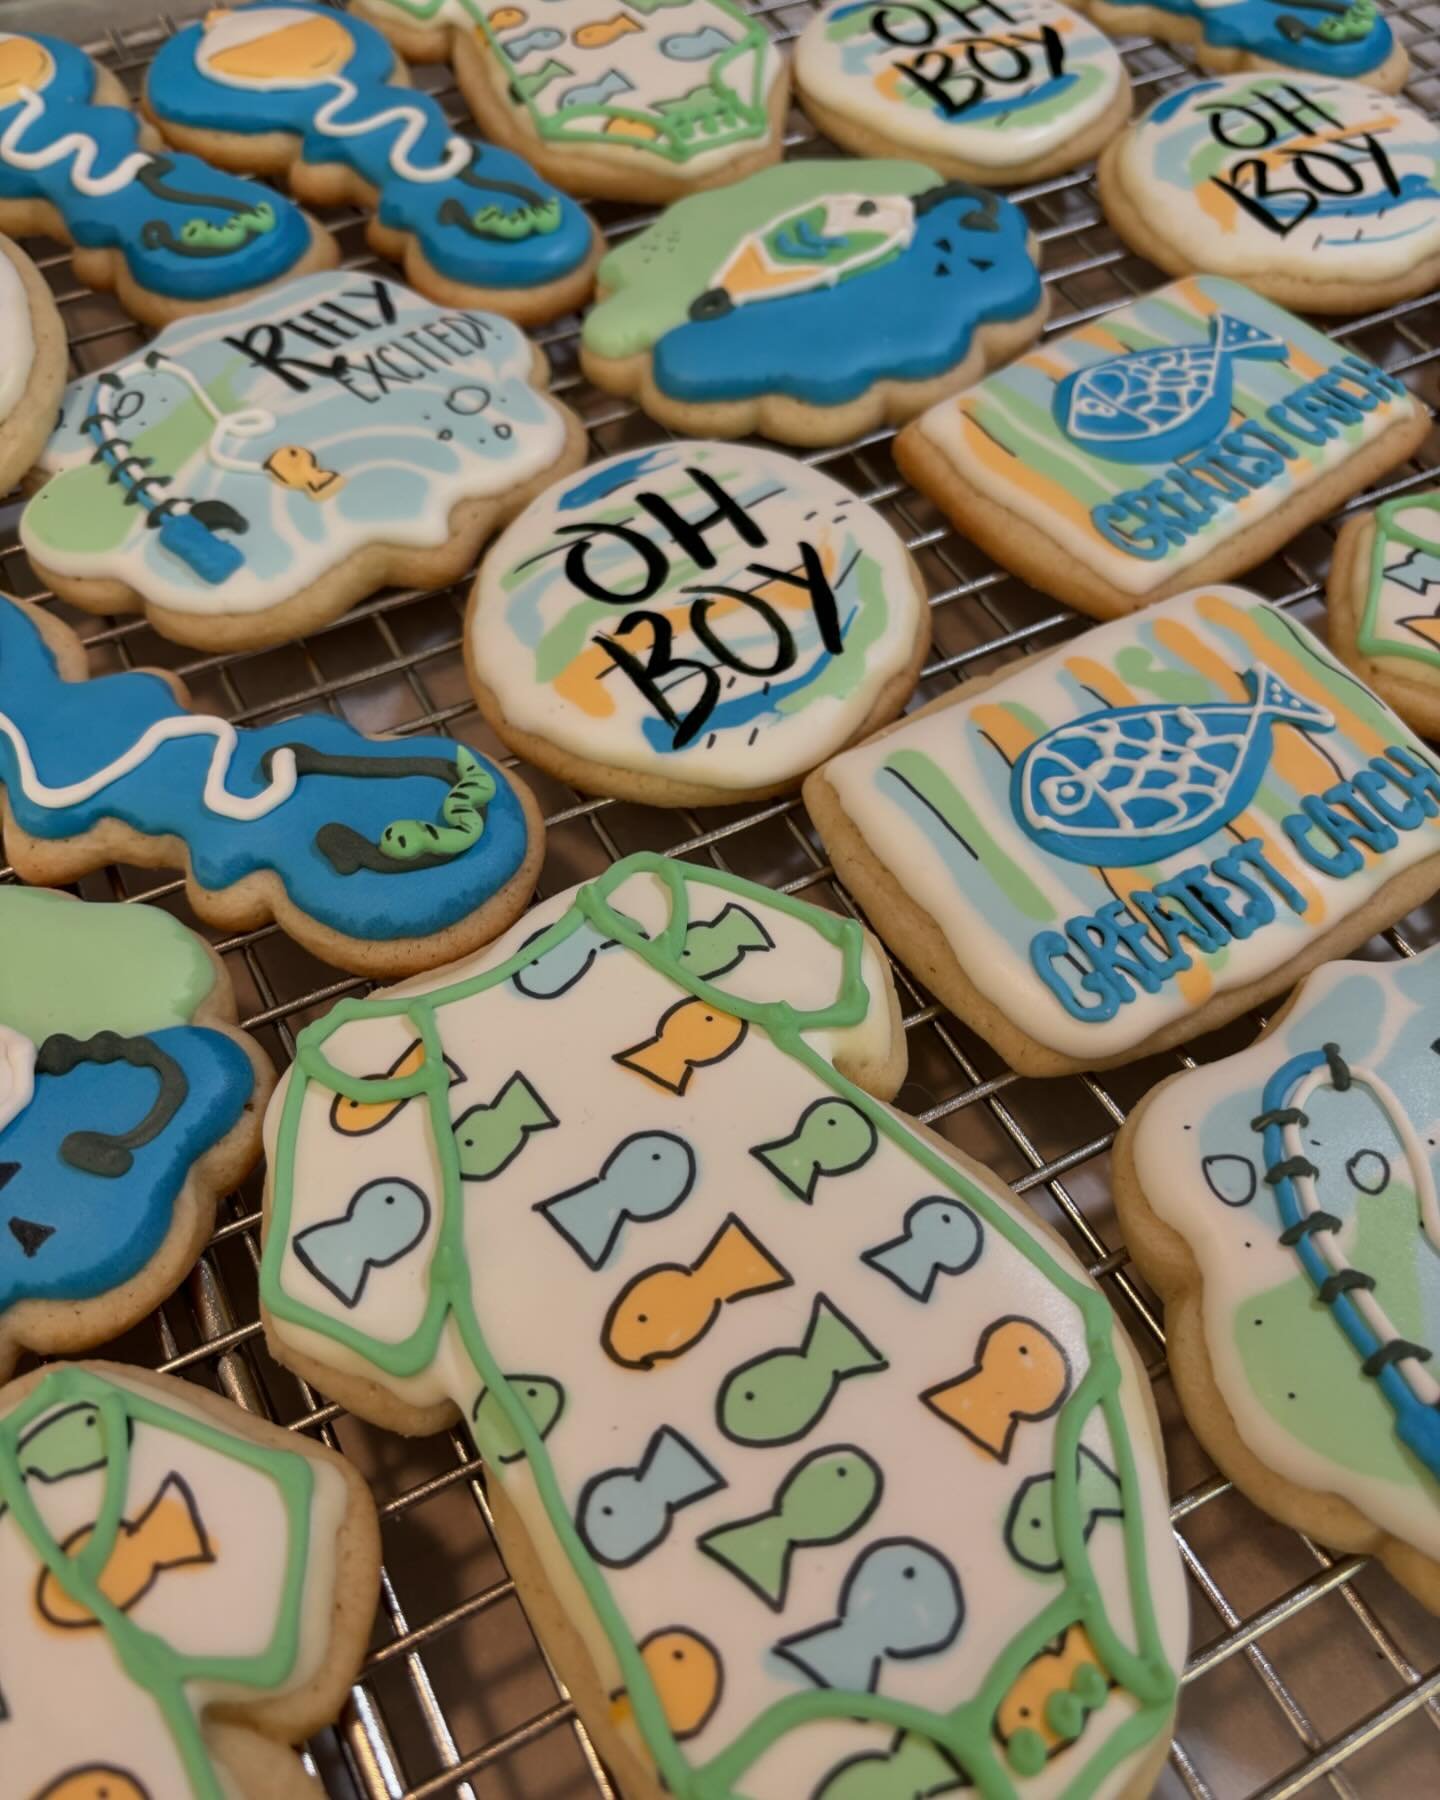 Fishing themed baby shower cookies for a boy 
.
.
.
.
#decoratedsugarcookies #babyshower #sugarcookies #flowerybranchga #royalicing #fishing #greatestcatch #fish inspiration from @sugar.rush.custom.cookies